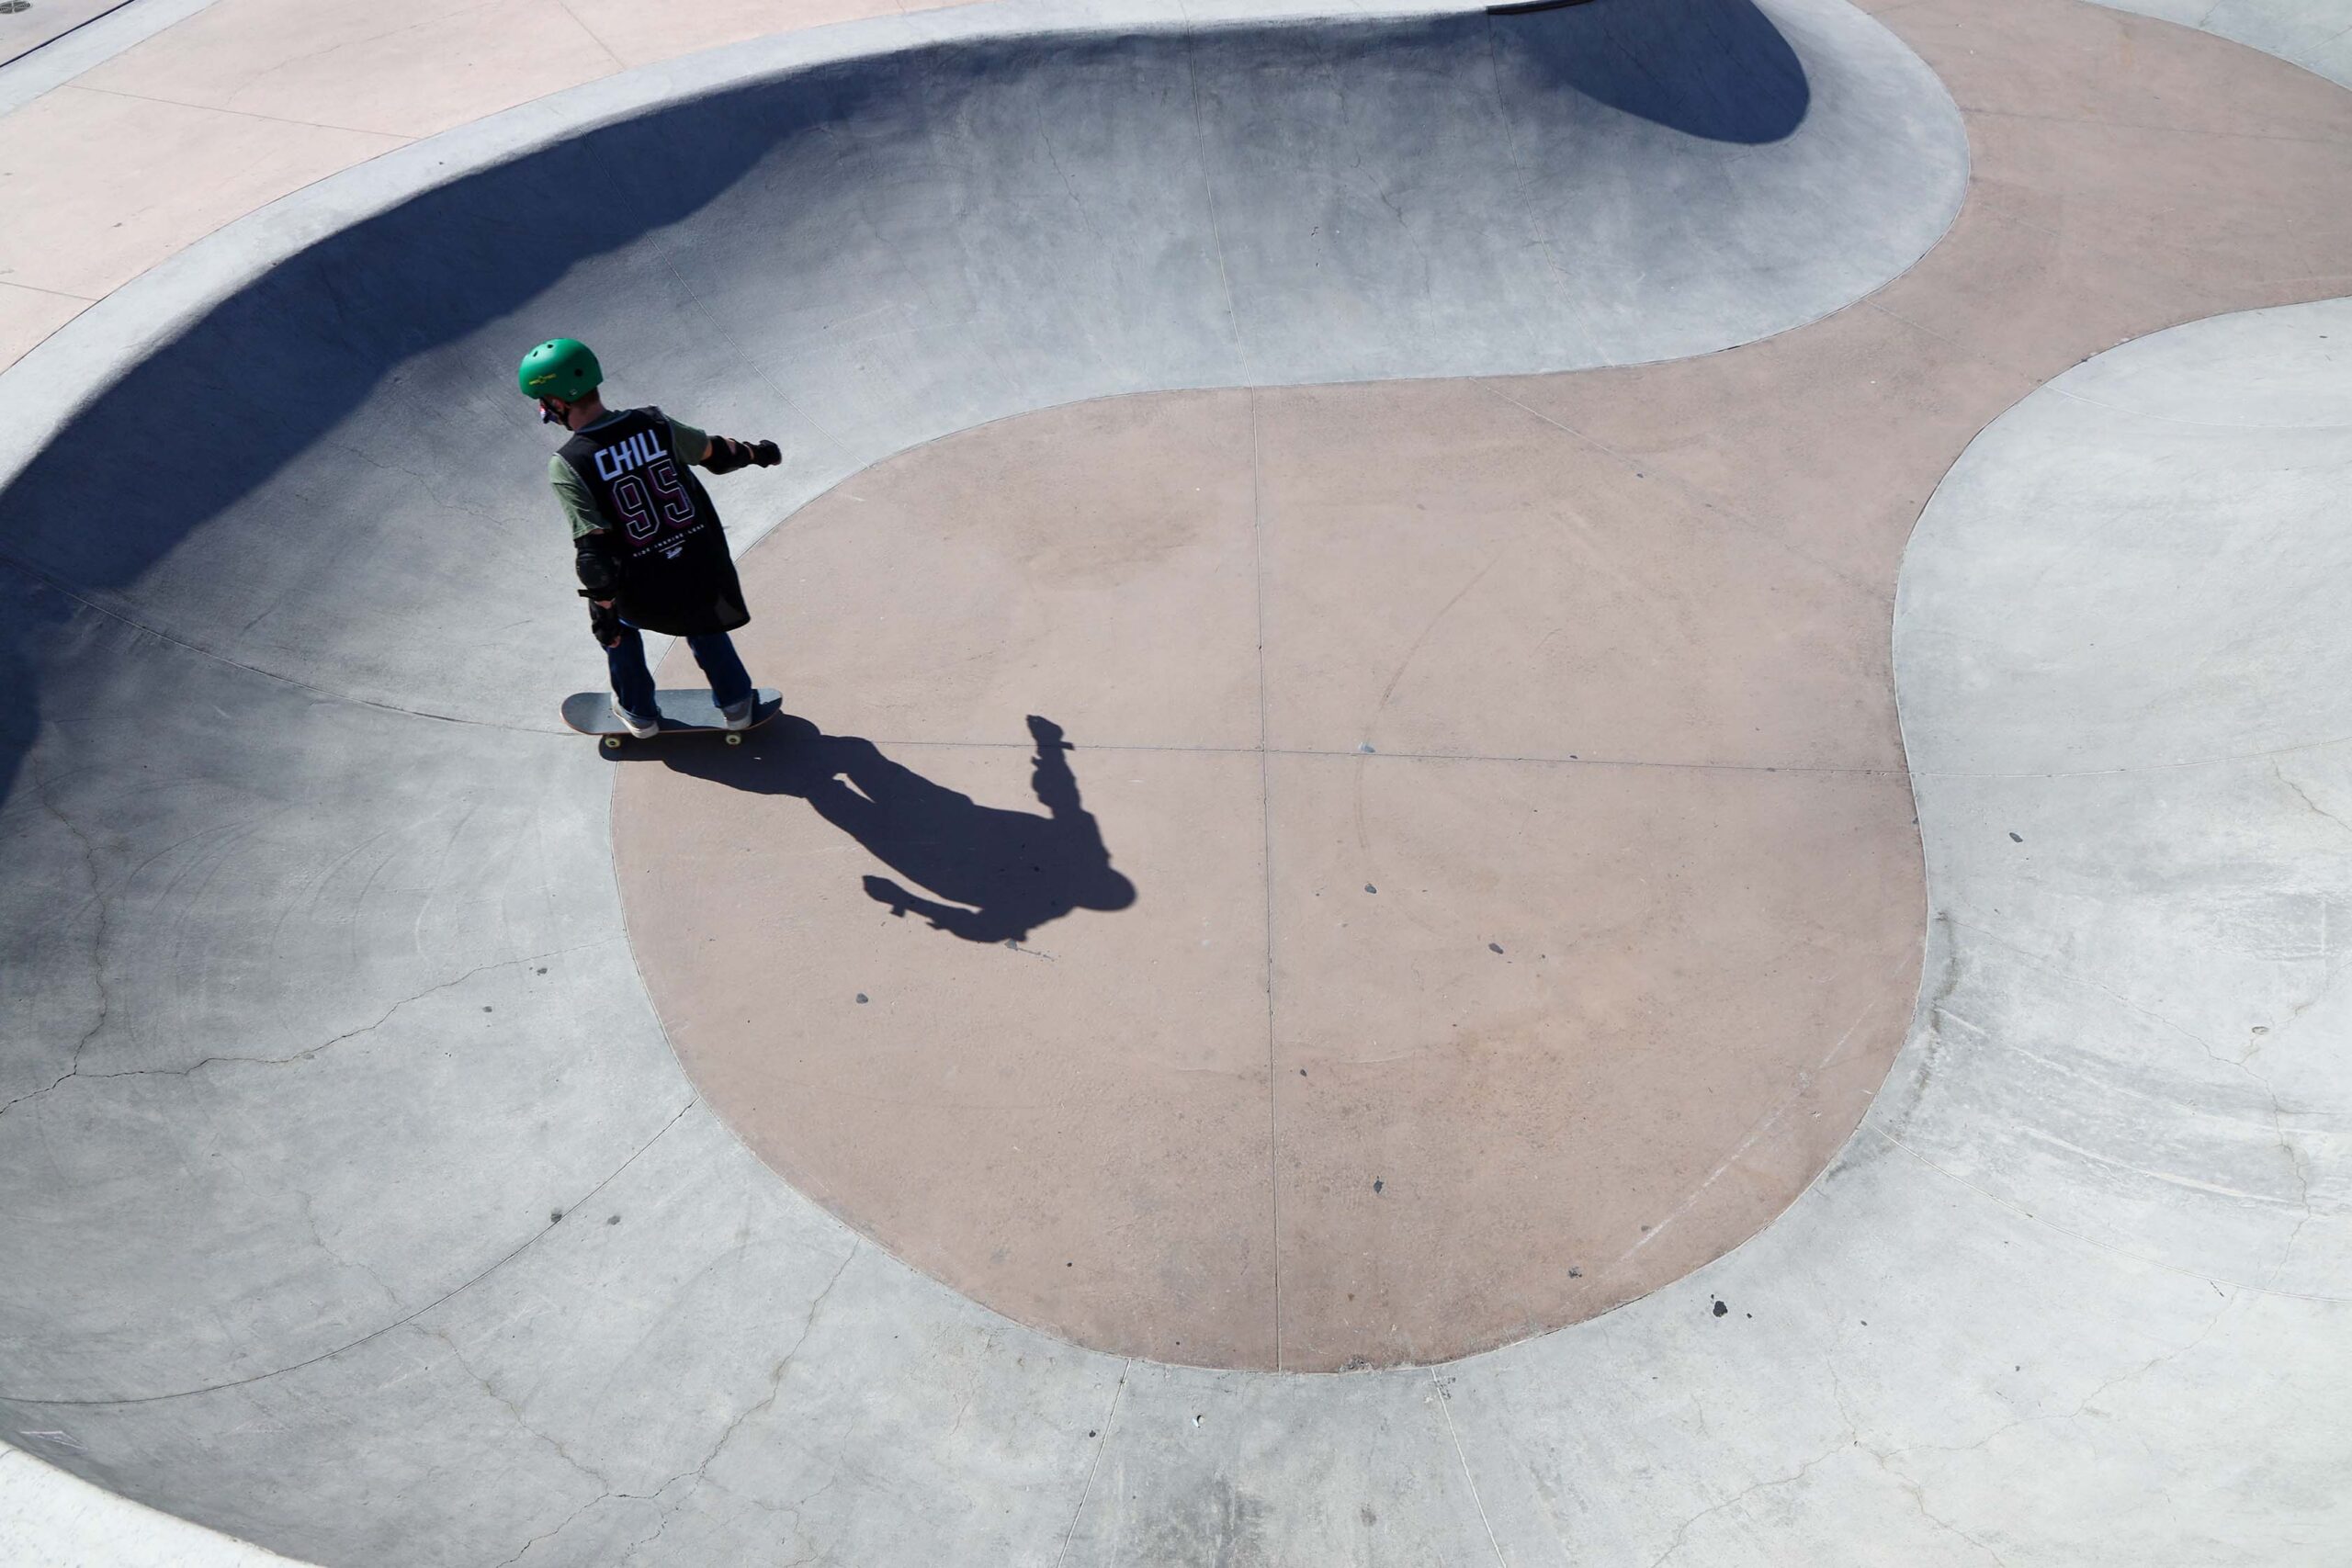 A Chill youth skating in a bowl at the skatepark.